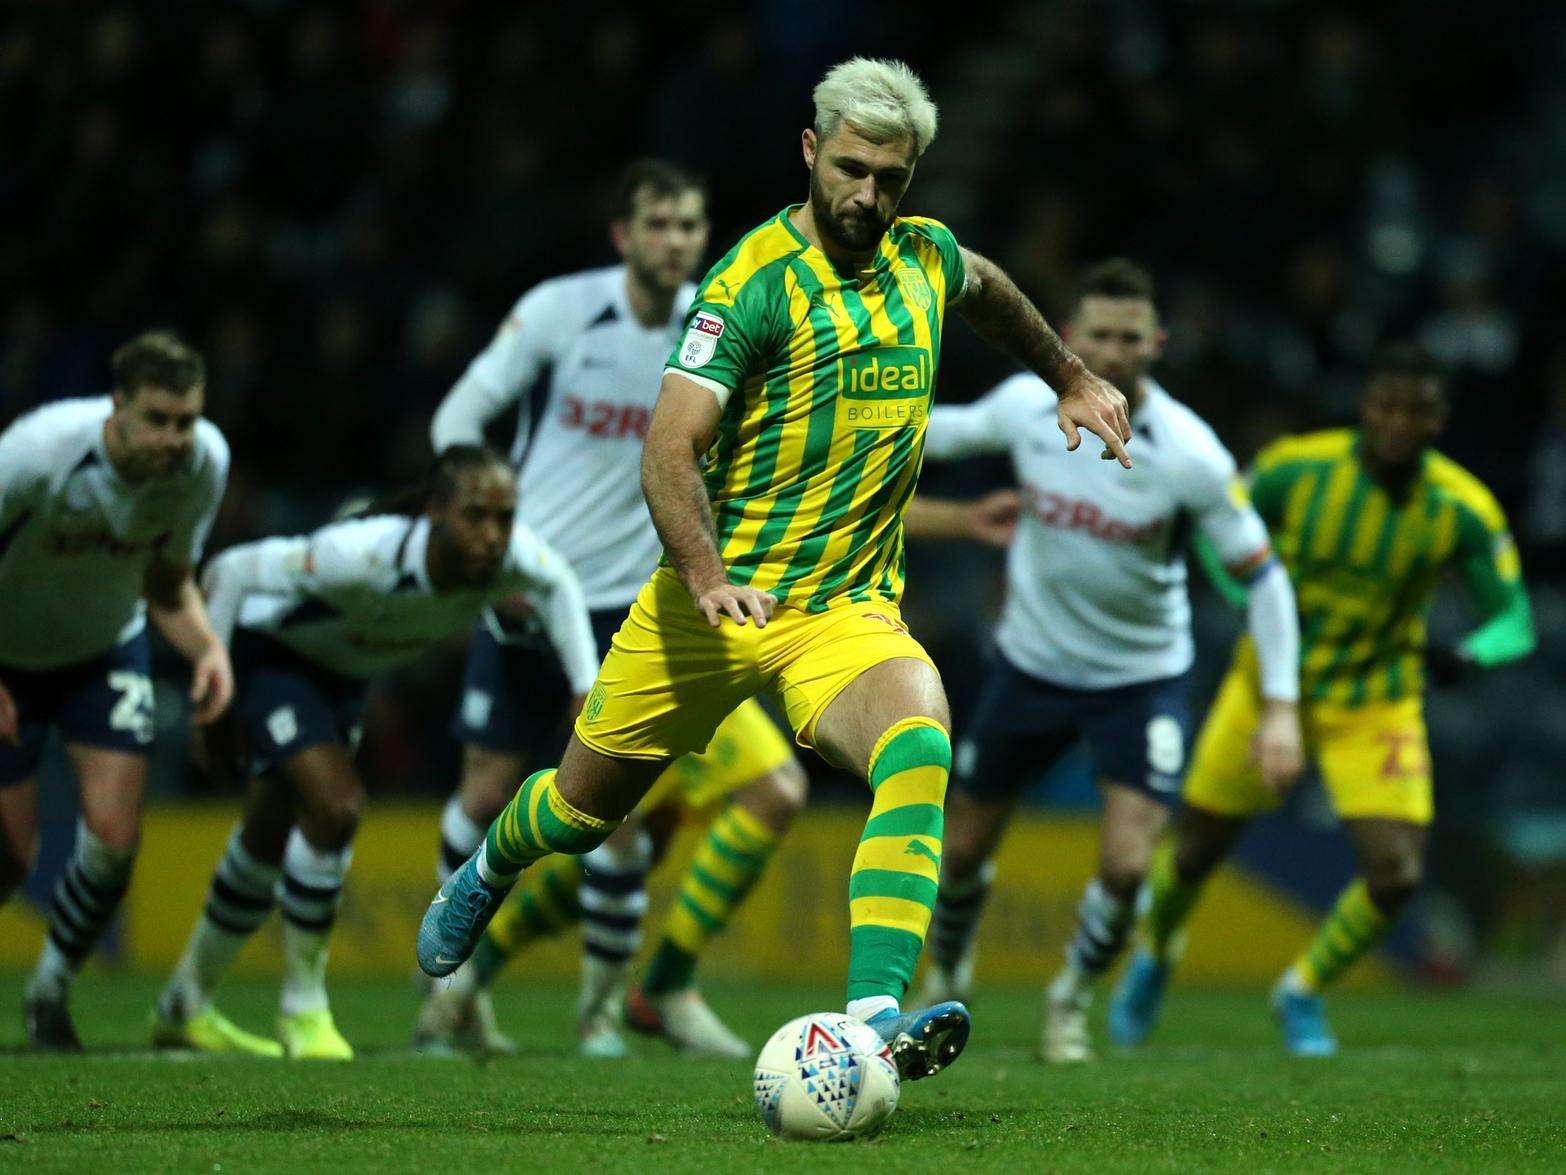 Can Preston North End avenge the 1-0 defeat from earlier this season?